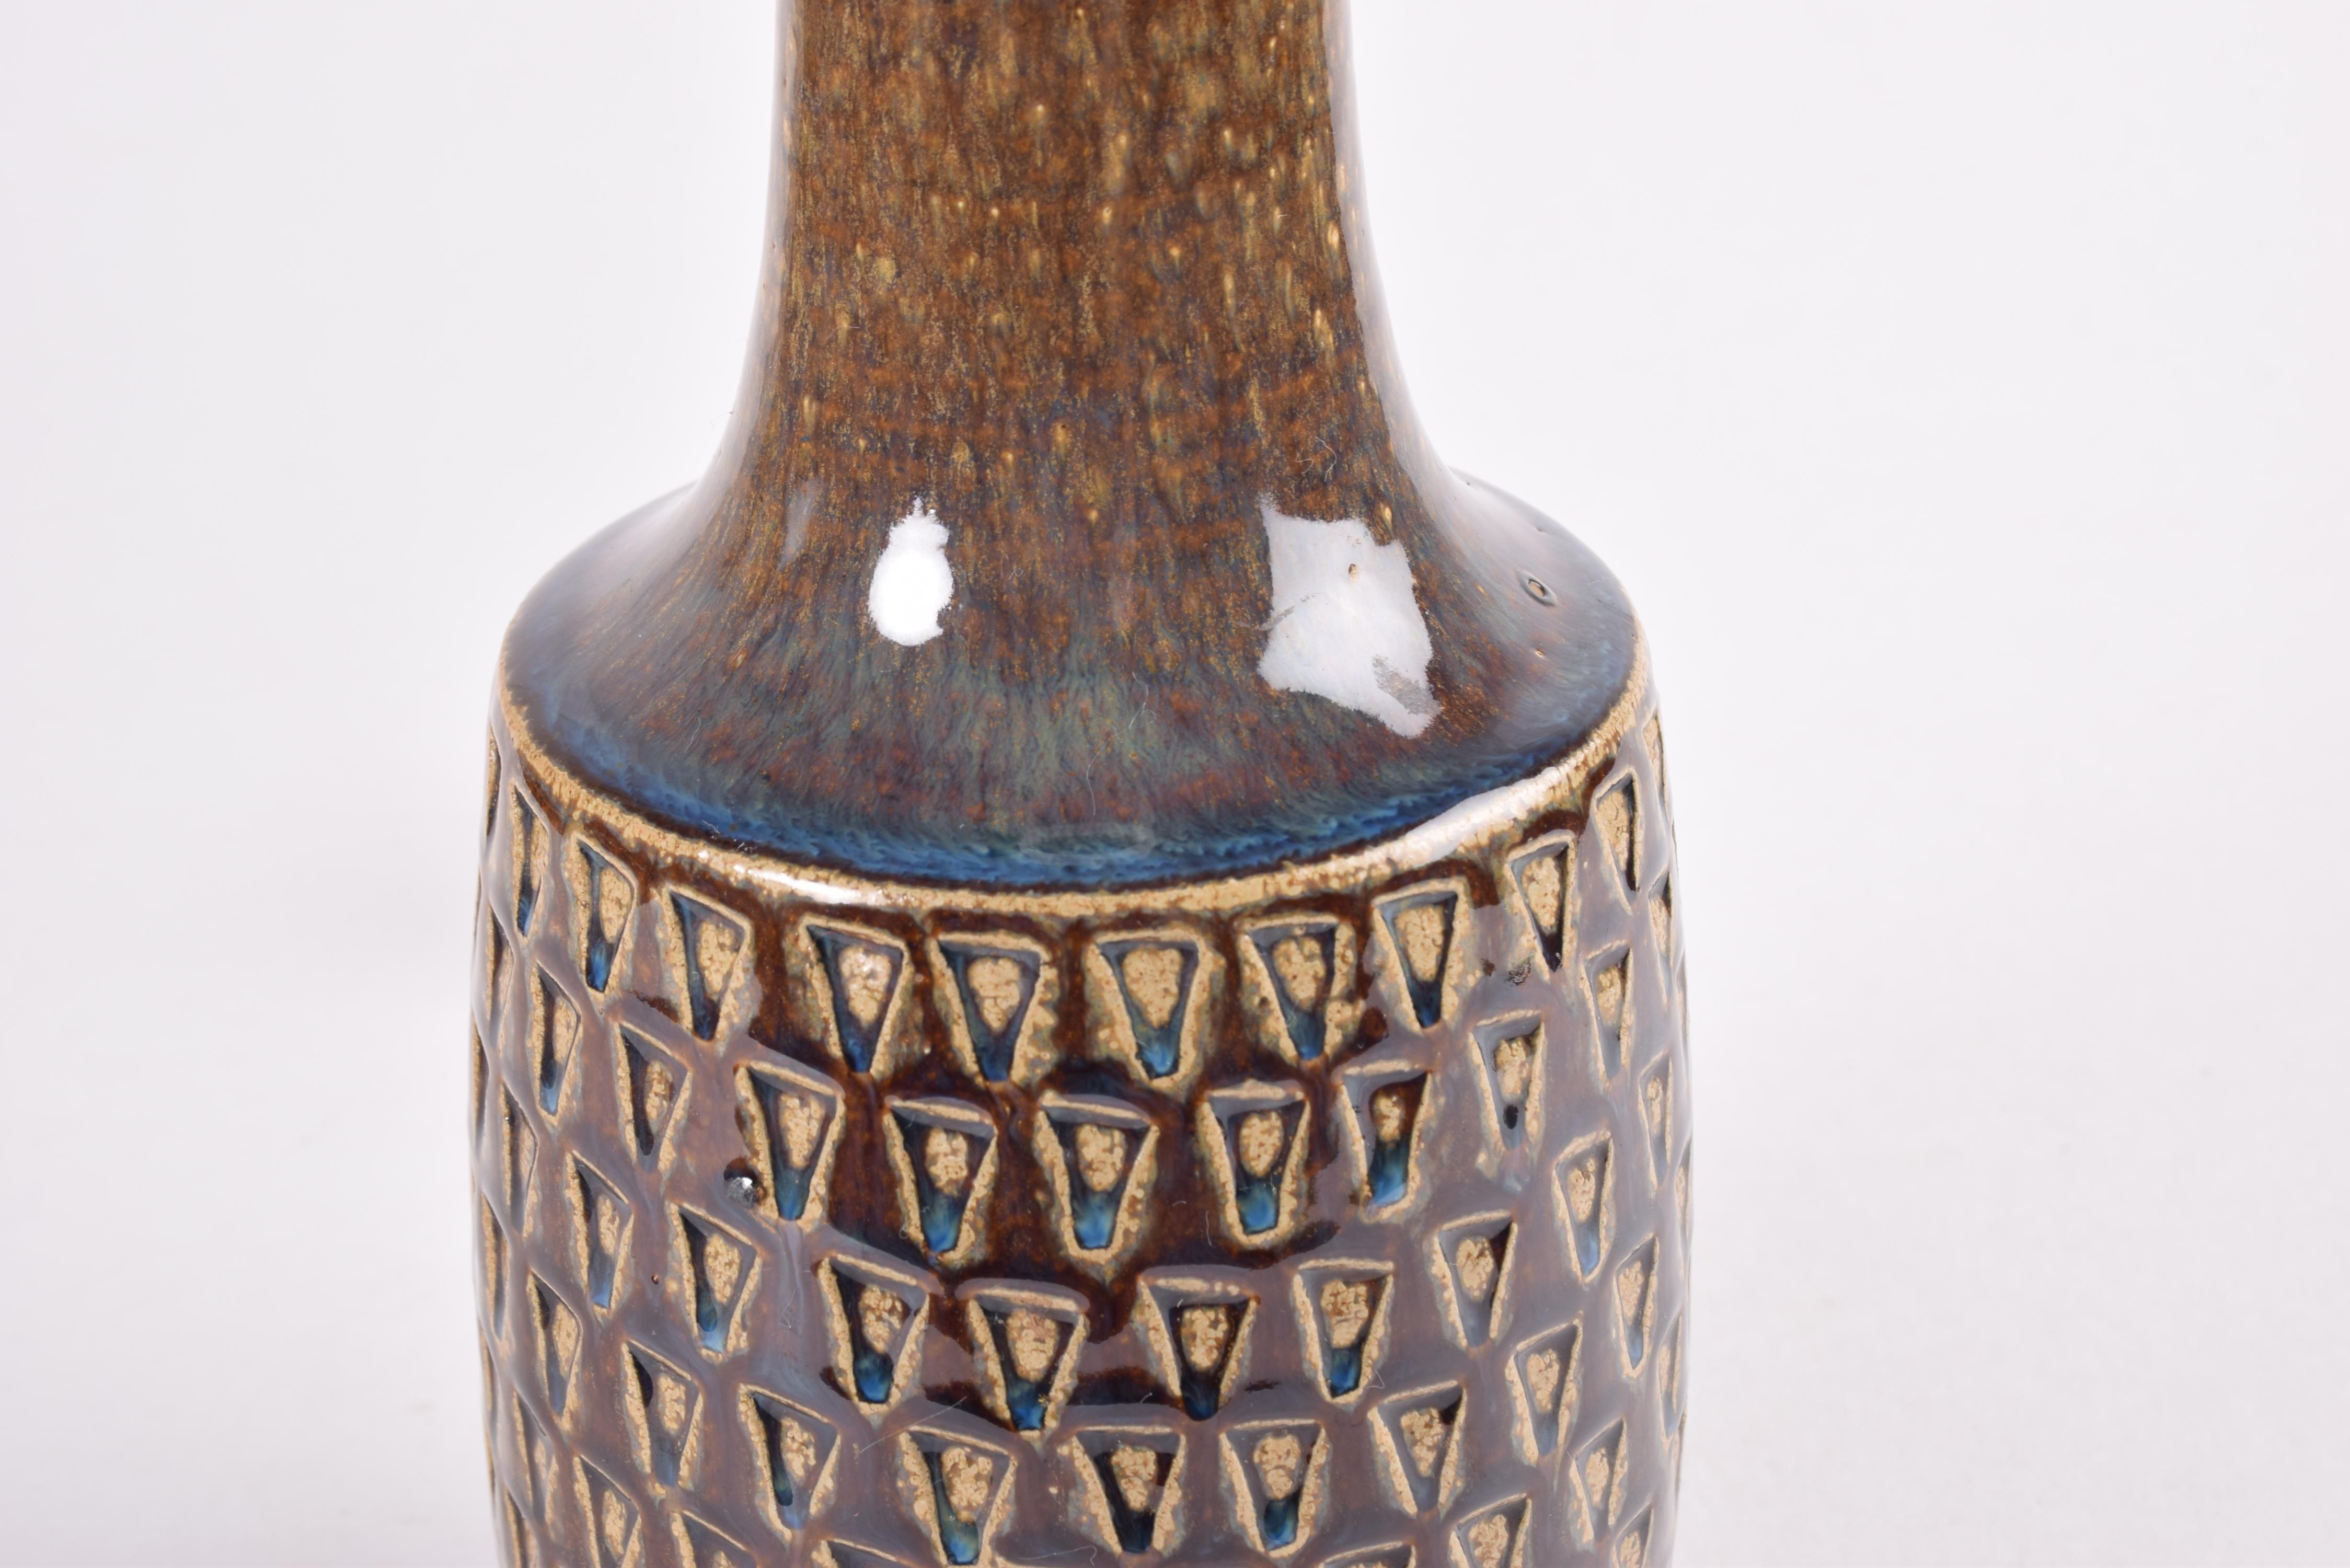 Mid-20th Century Danish Modern Søholm Ceramic Table Lamp Brown & Blue Textured Surface, 1960s For Sale